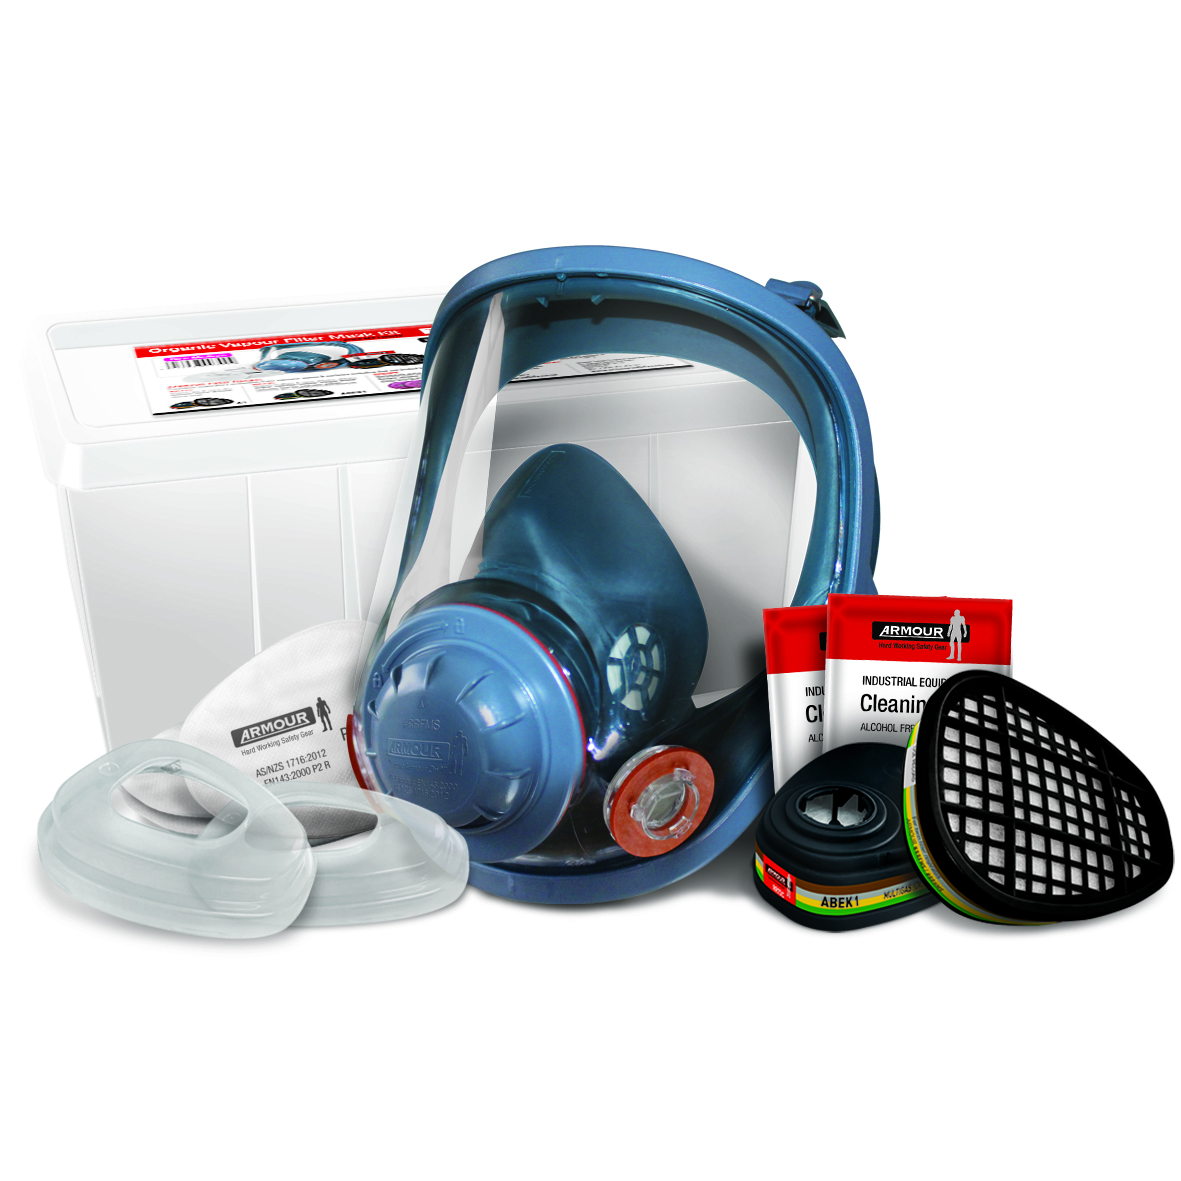 Armour Safety Products Ltd. - Armour Full Face Organic Vapour & Multi Gas Mask Kit